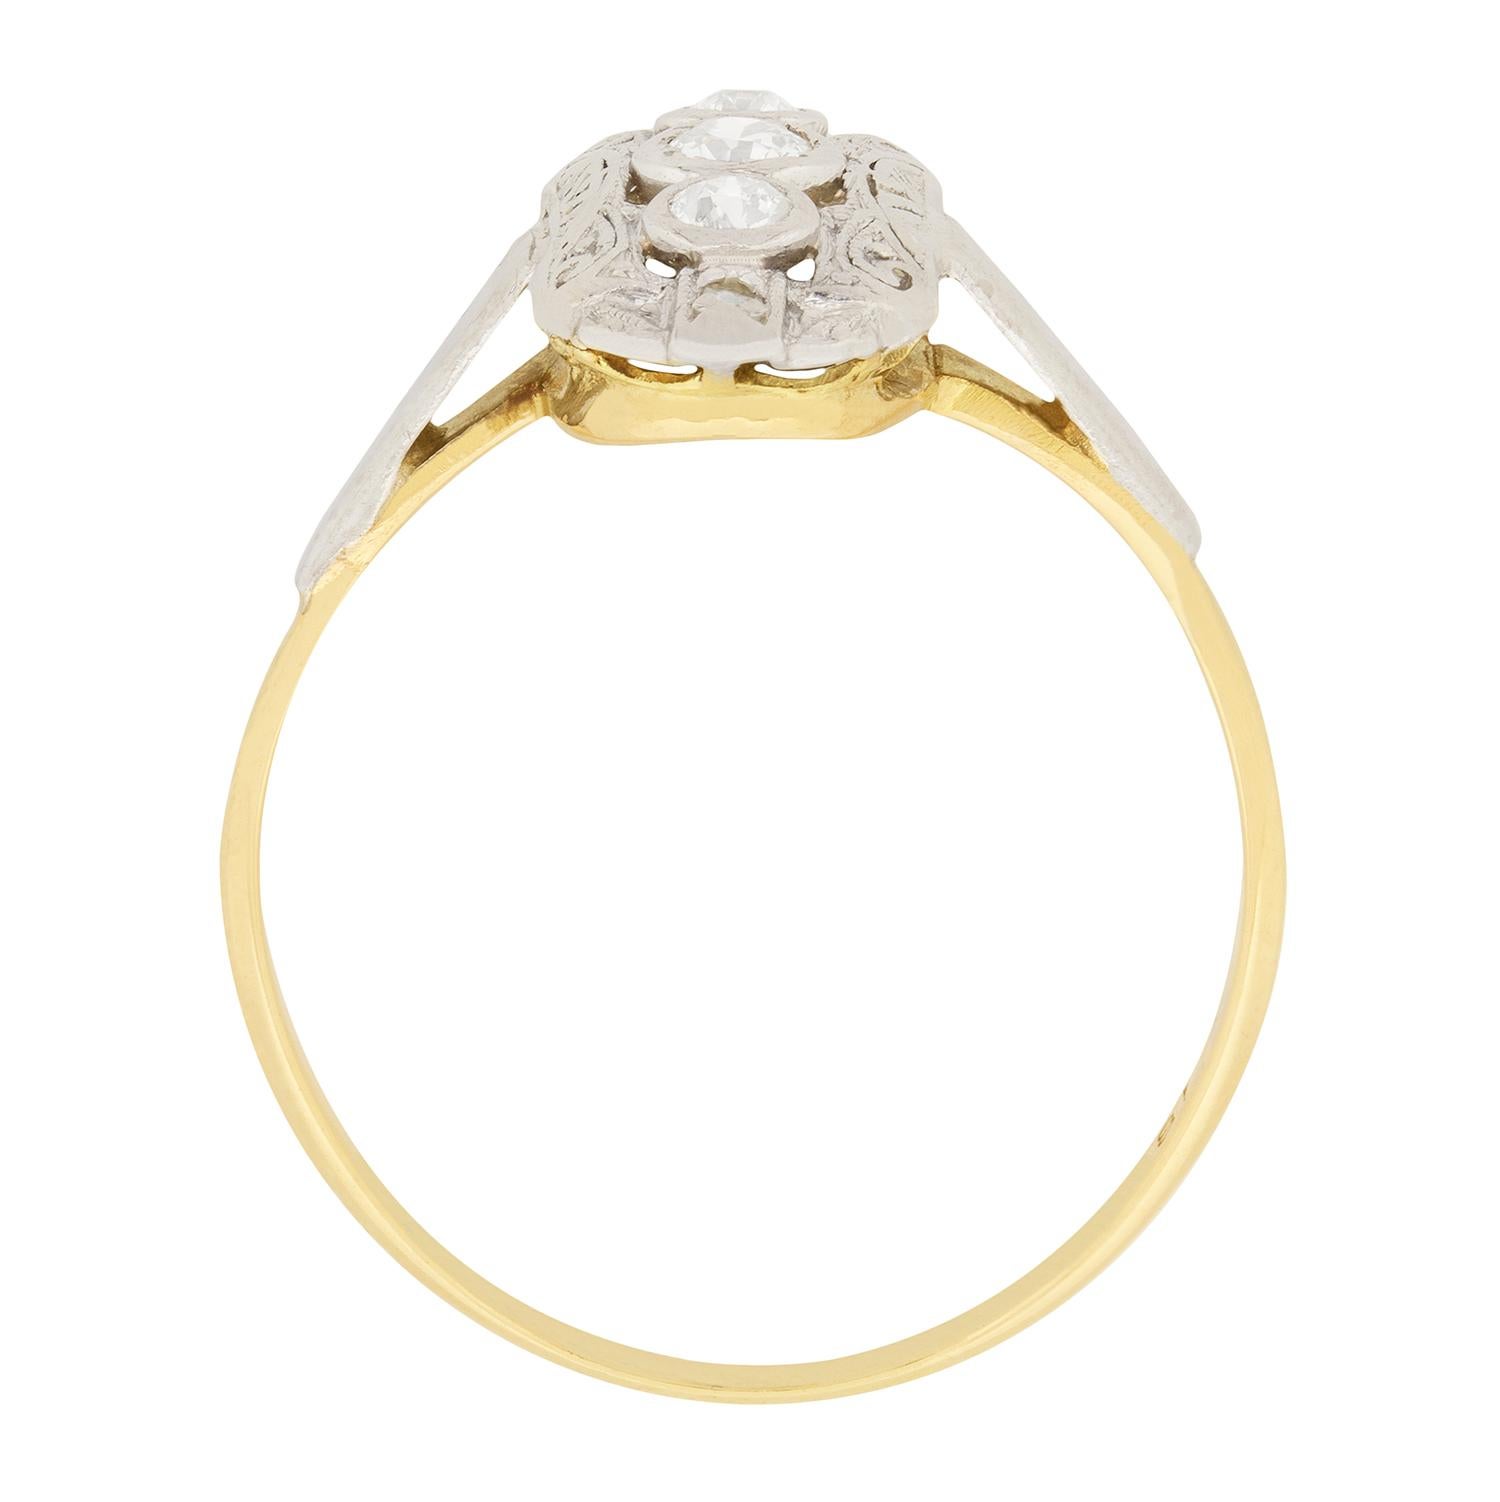 This diamond cluster ring is a lovely example of the style of the Edwardian period. A 0.15 carat old cut diamond sits in the centre, while there is a 0.10 carat rose cut diamond above and below. The diamonds are rub-over set in a finely engraved